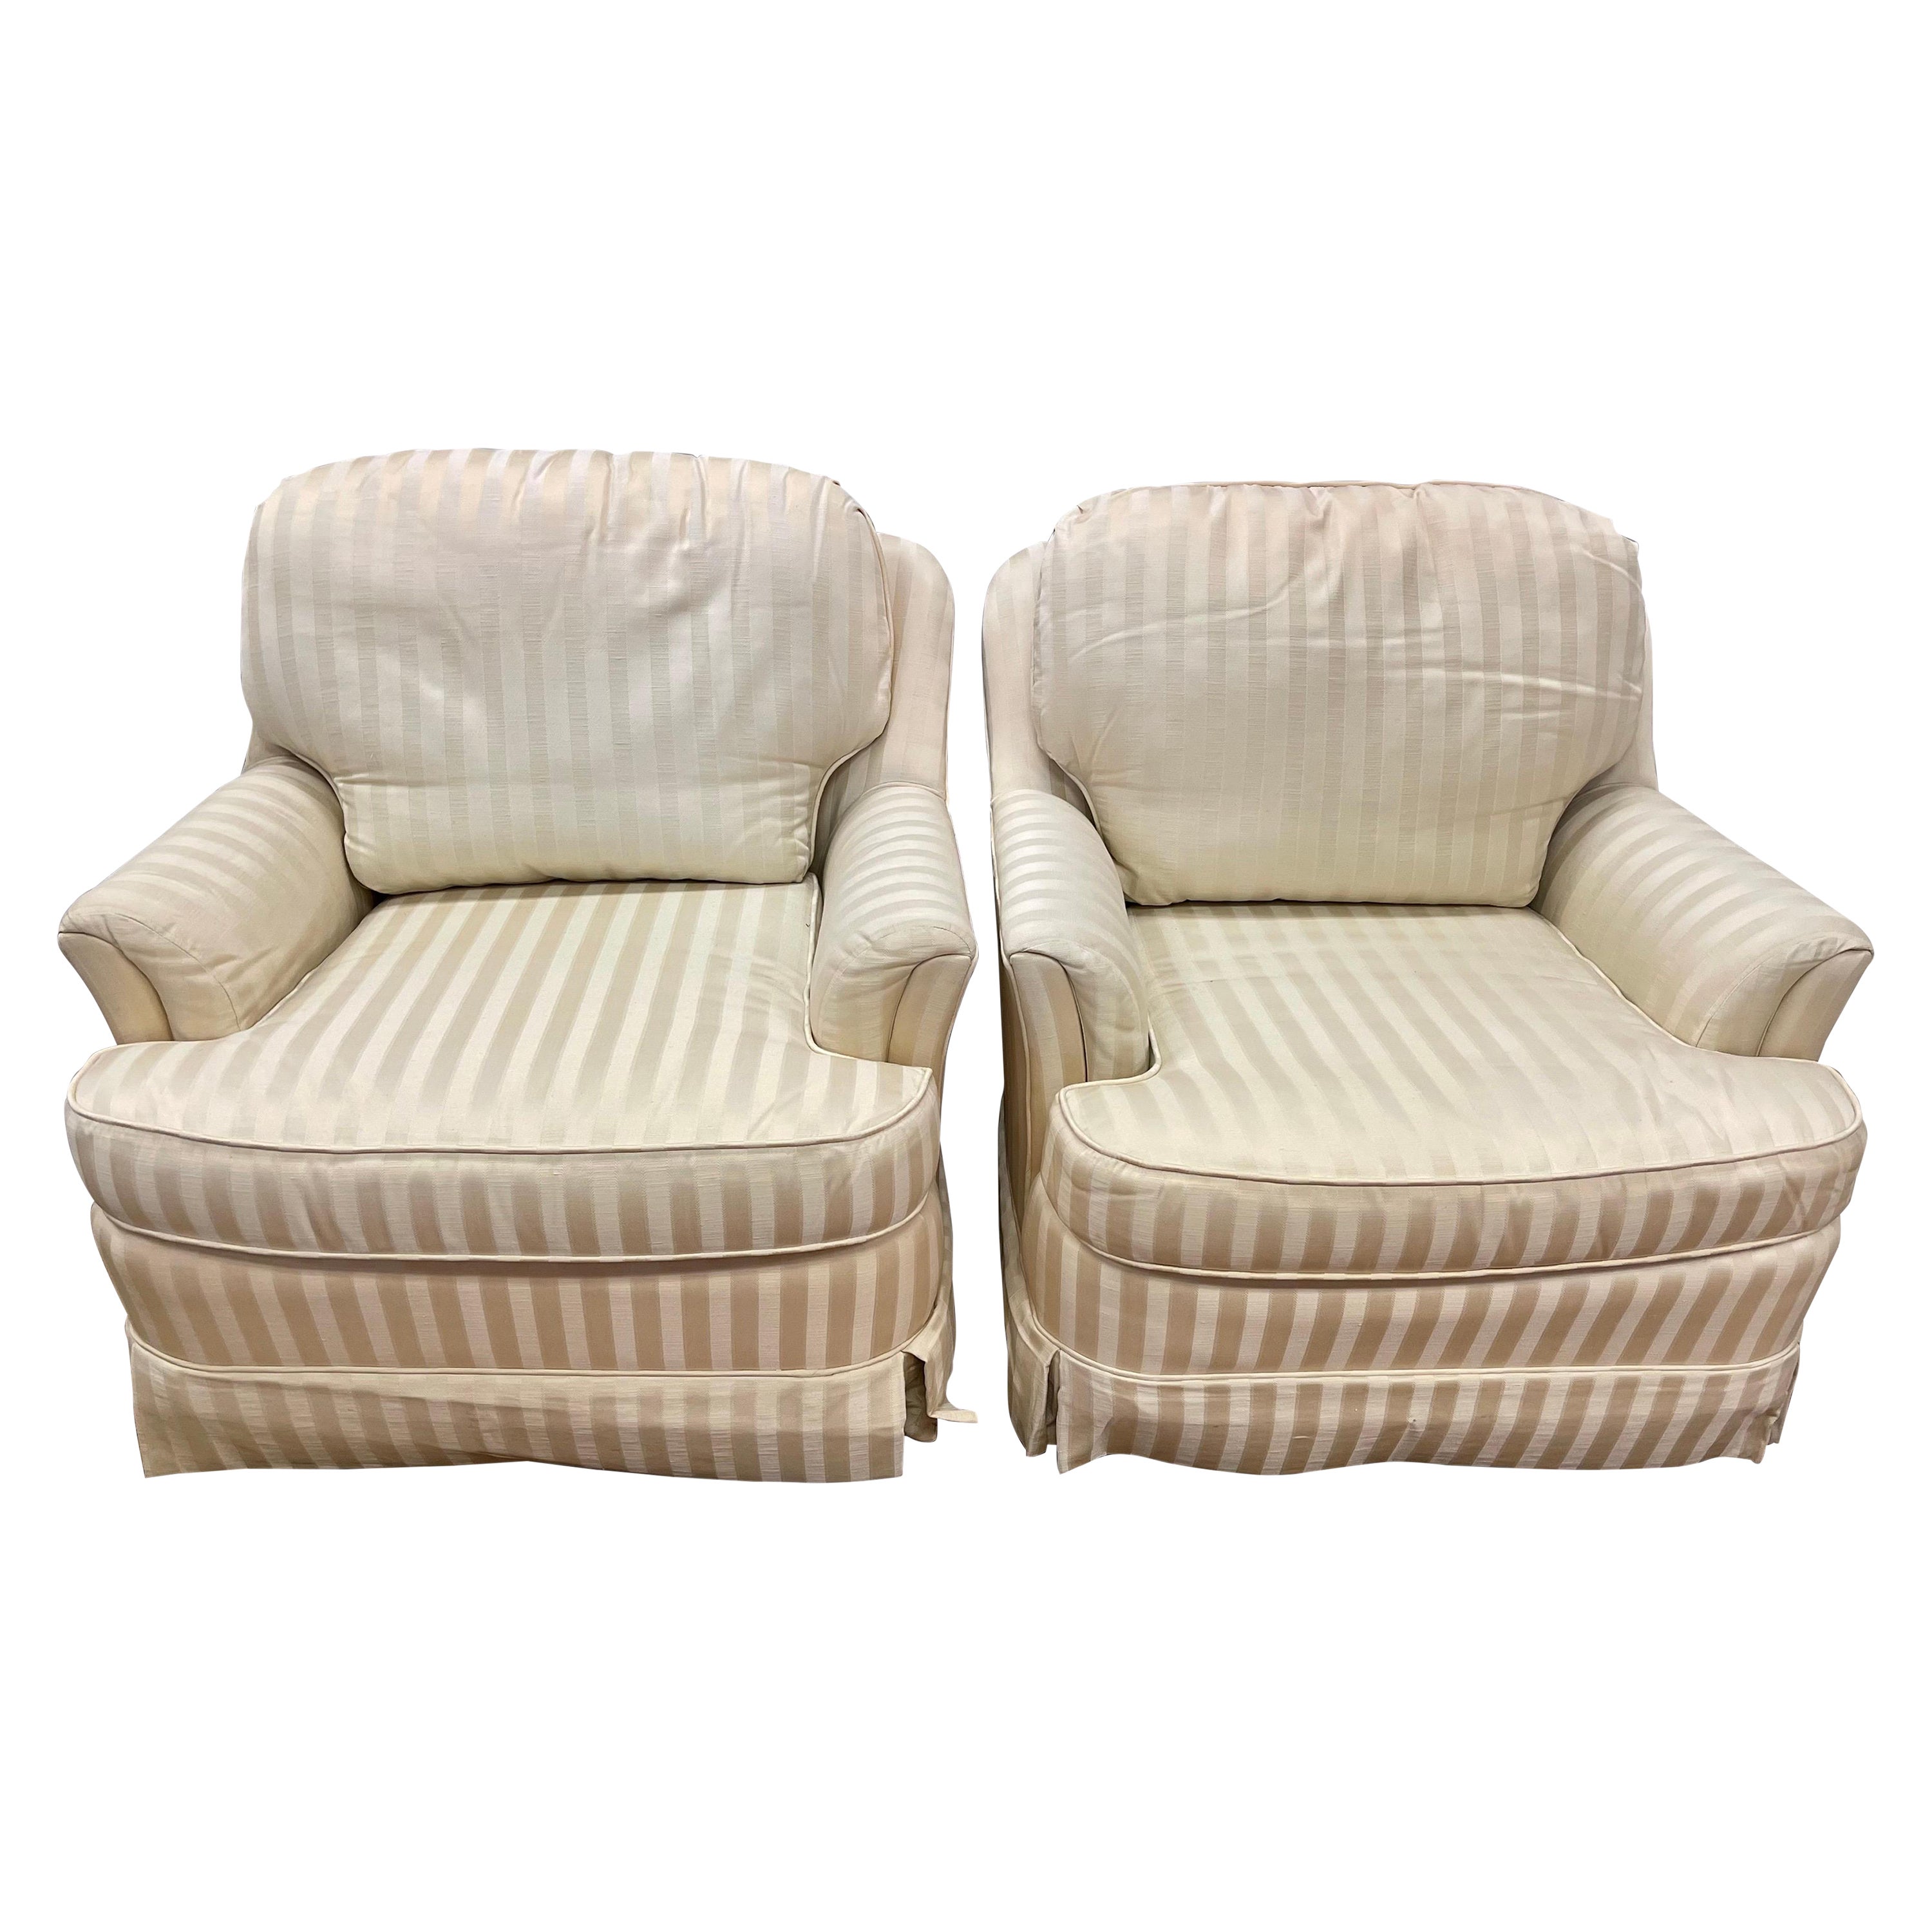 Pair of Century Furniture Vintage Upholstered Club Chairs